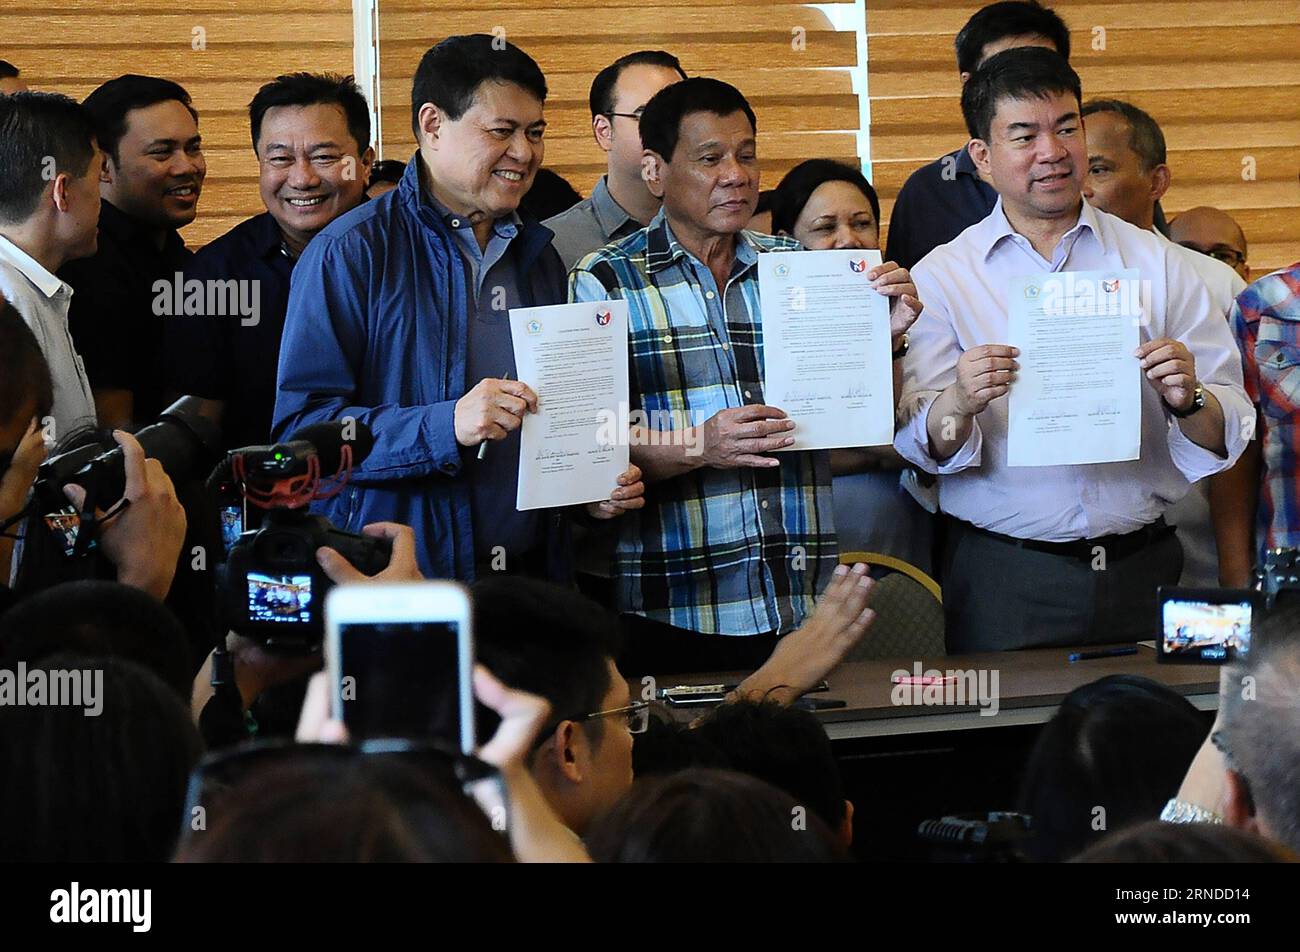 (160516) -- DAVAO PROVINCE, May 16, 2016 -- Presumptive Philippine president-elect Rodrigo Duterte (C) poses for photos with members of his political party during a press conference in Davao Province, the Philippines, May 16, 2016. Presumptive Philippine president-elect Rodrigo Duterte vowed to restore death penalty in his country, according to his speech on Monday. ) PHILIPPINES-DAVAO PROVINCE-DUTERTE-PRESS CONFERENCE Stringer PUBLICATIONxNOTxINxCHN   160516 Davao Province May 16 2016 presumptive Philippine President elect Rodrigo Duterte C Poses for Photos With Members of His Political Party Stock Photo